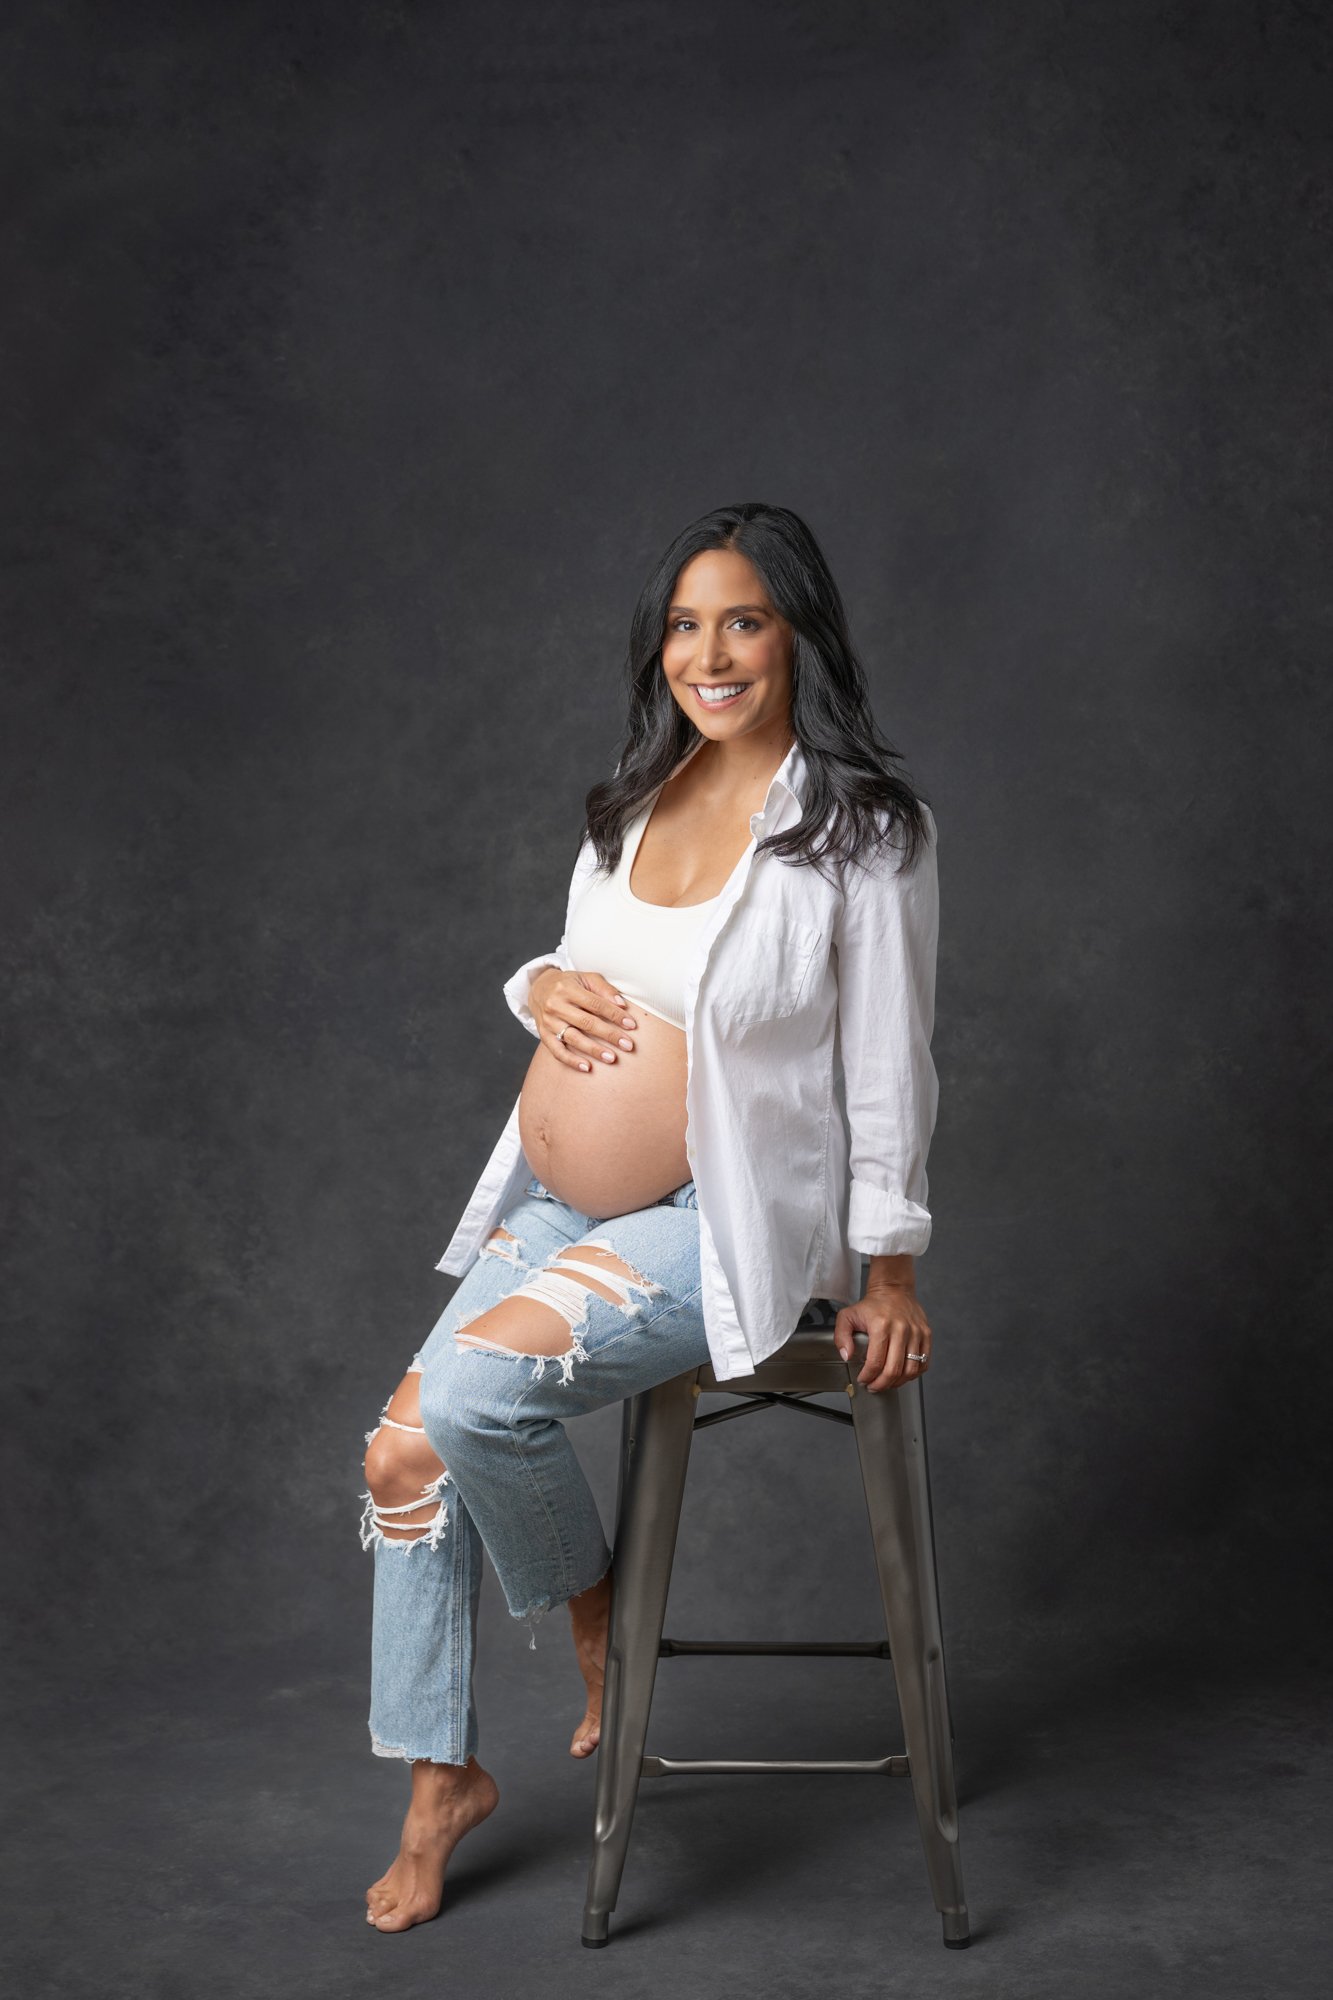  Pregnant mother poses on a metal bar stool during a maternity photography session with Nicole Hawkins Photography. #southorange #newjerseyphotographers #maternitysession #maternityposeinspo #studiophotography #formalmaternitystyle #casualmaternityst